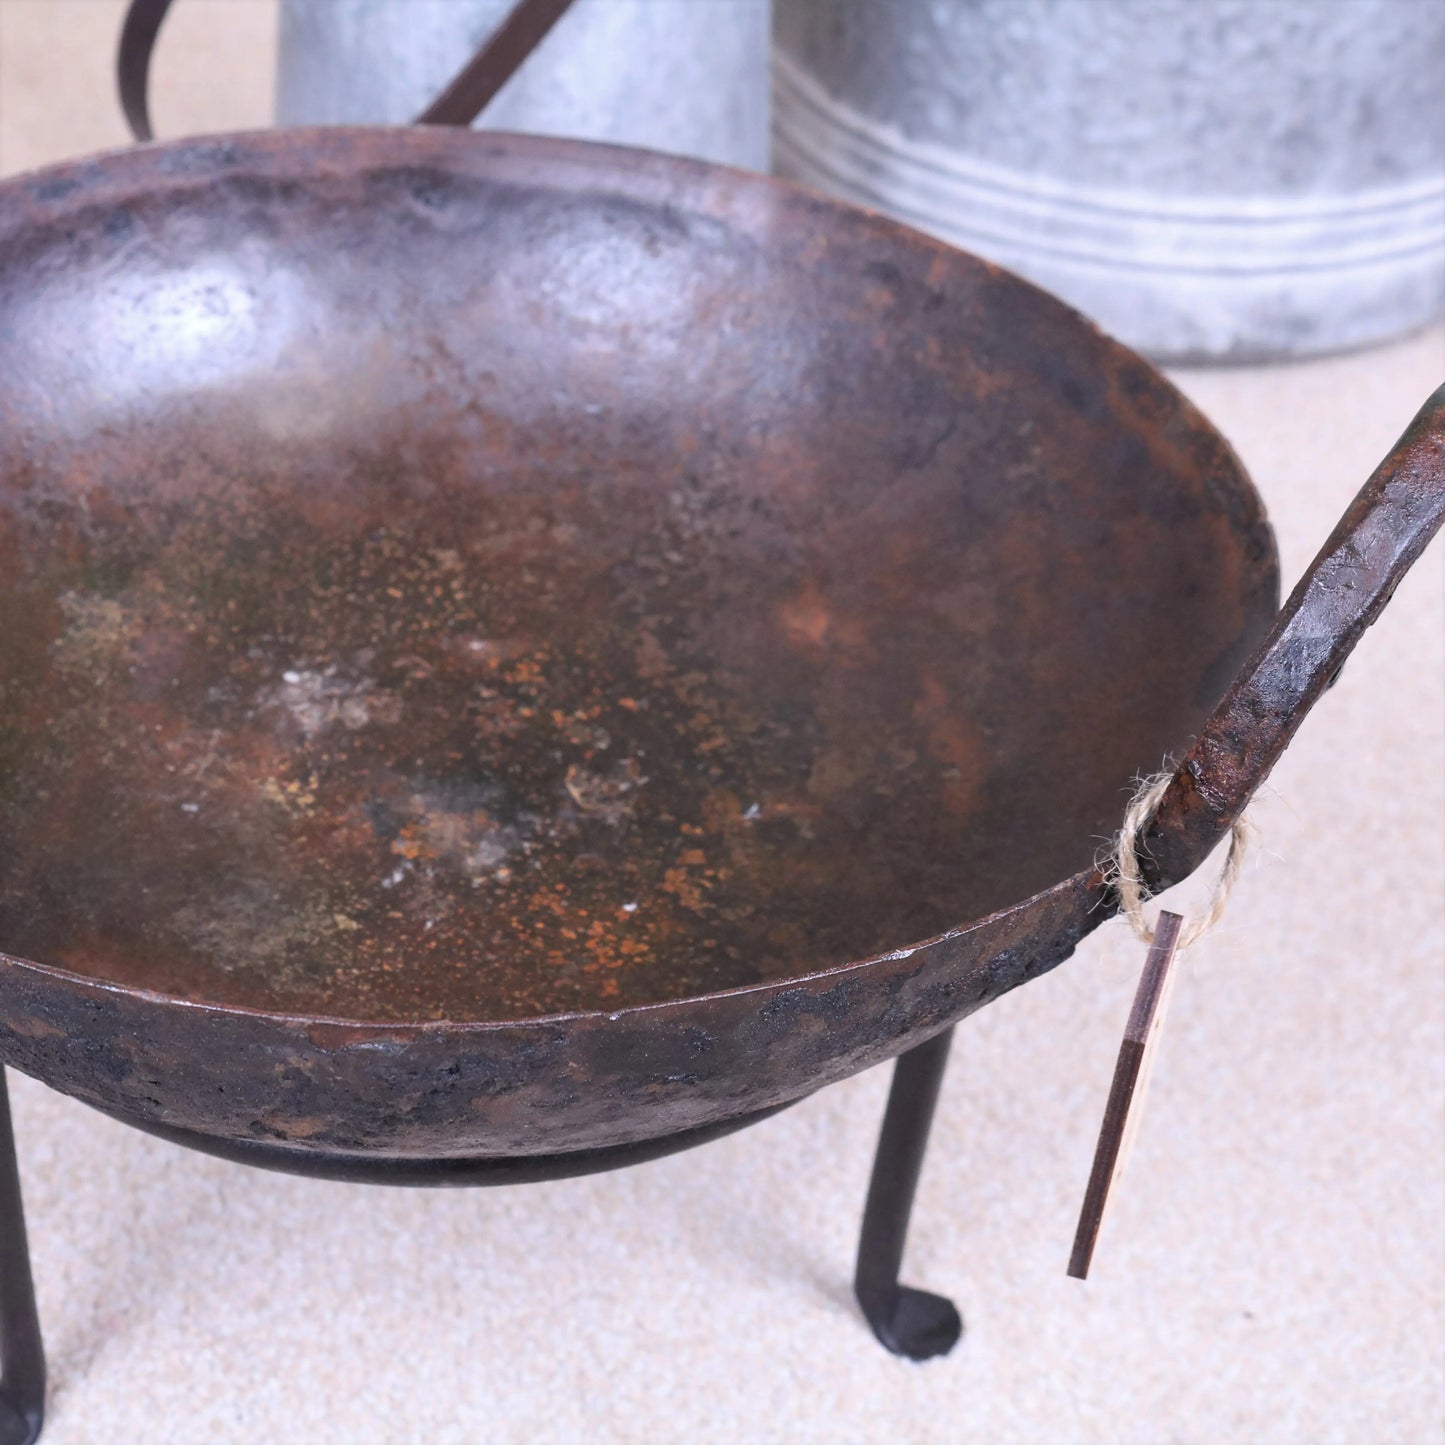 Vintage Kadai Bowl with Stand Garden Fire Bowl